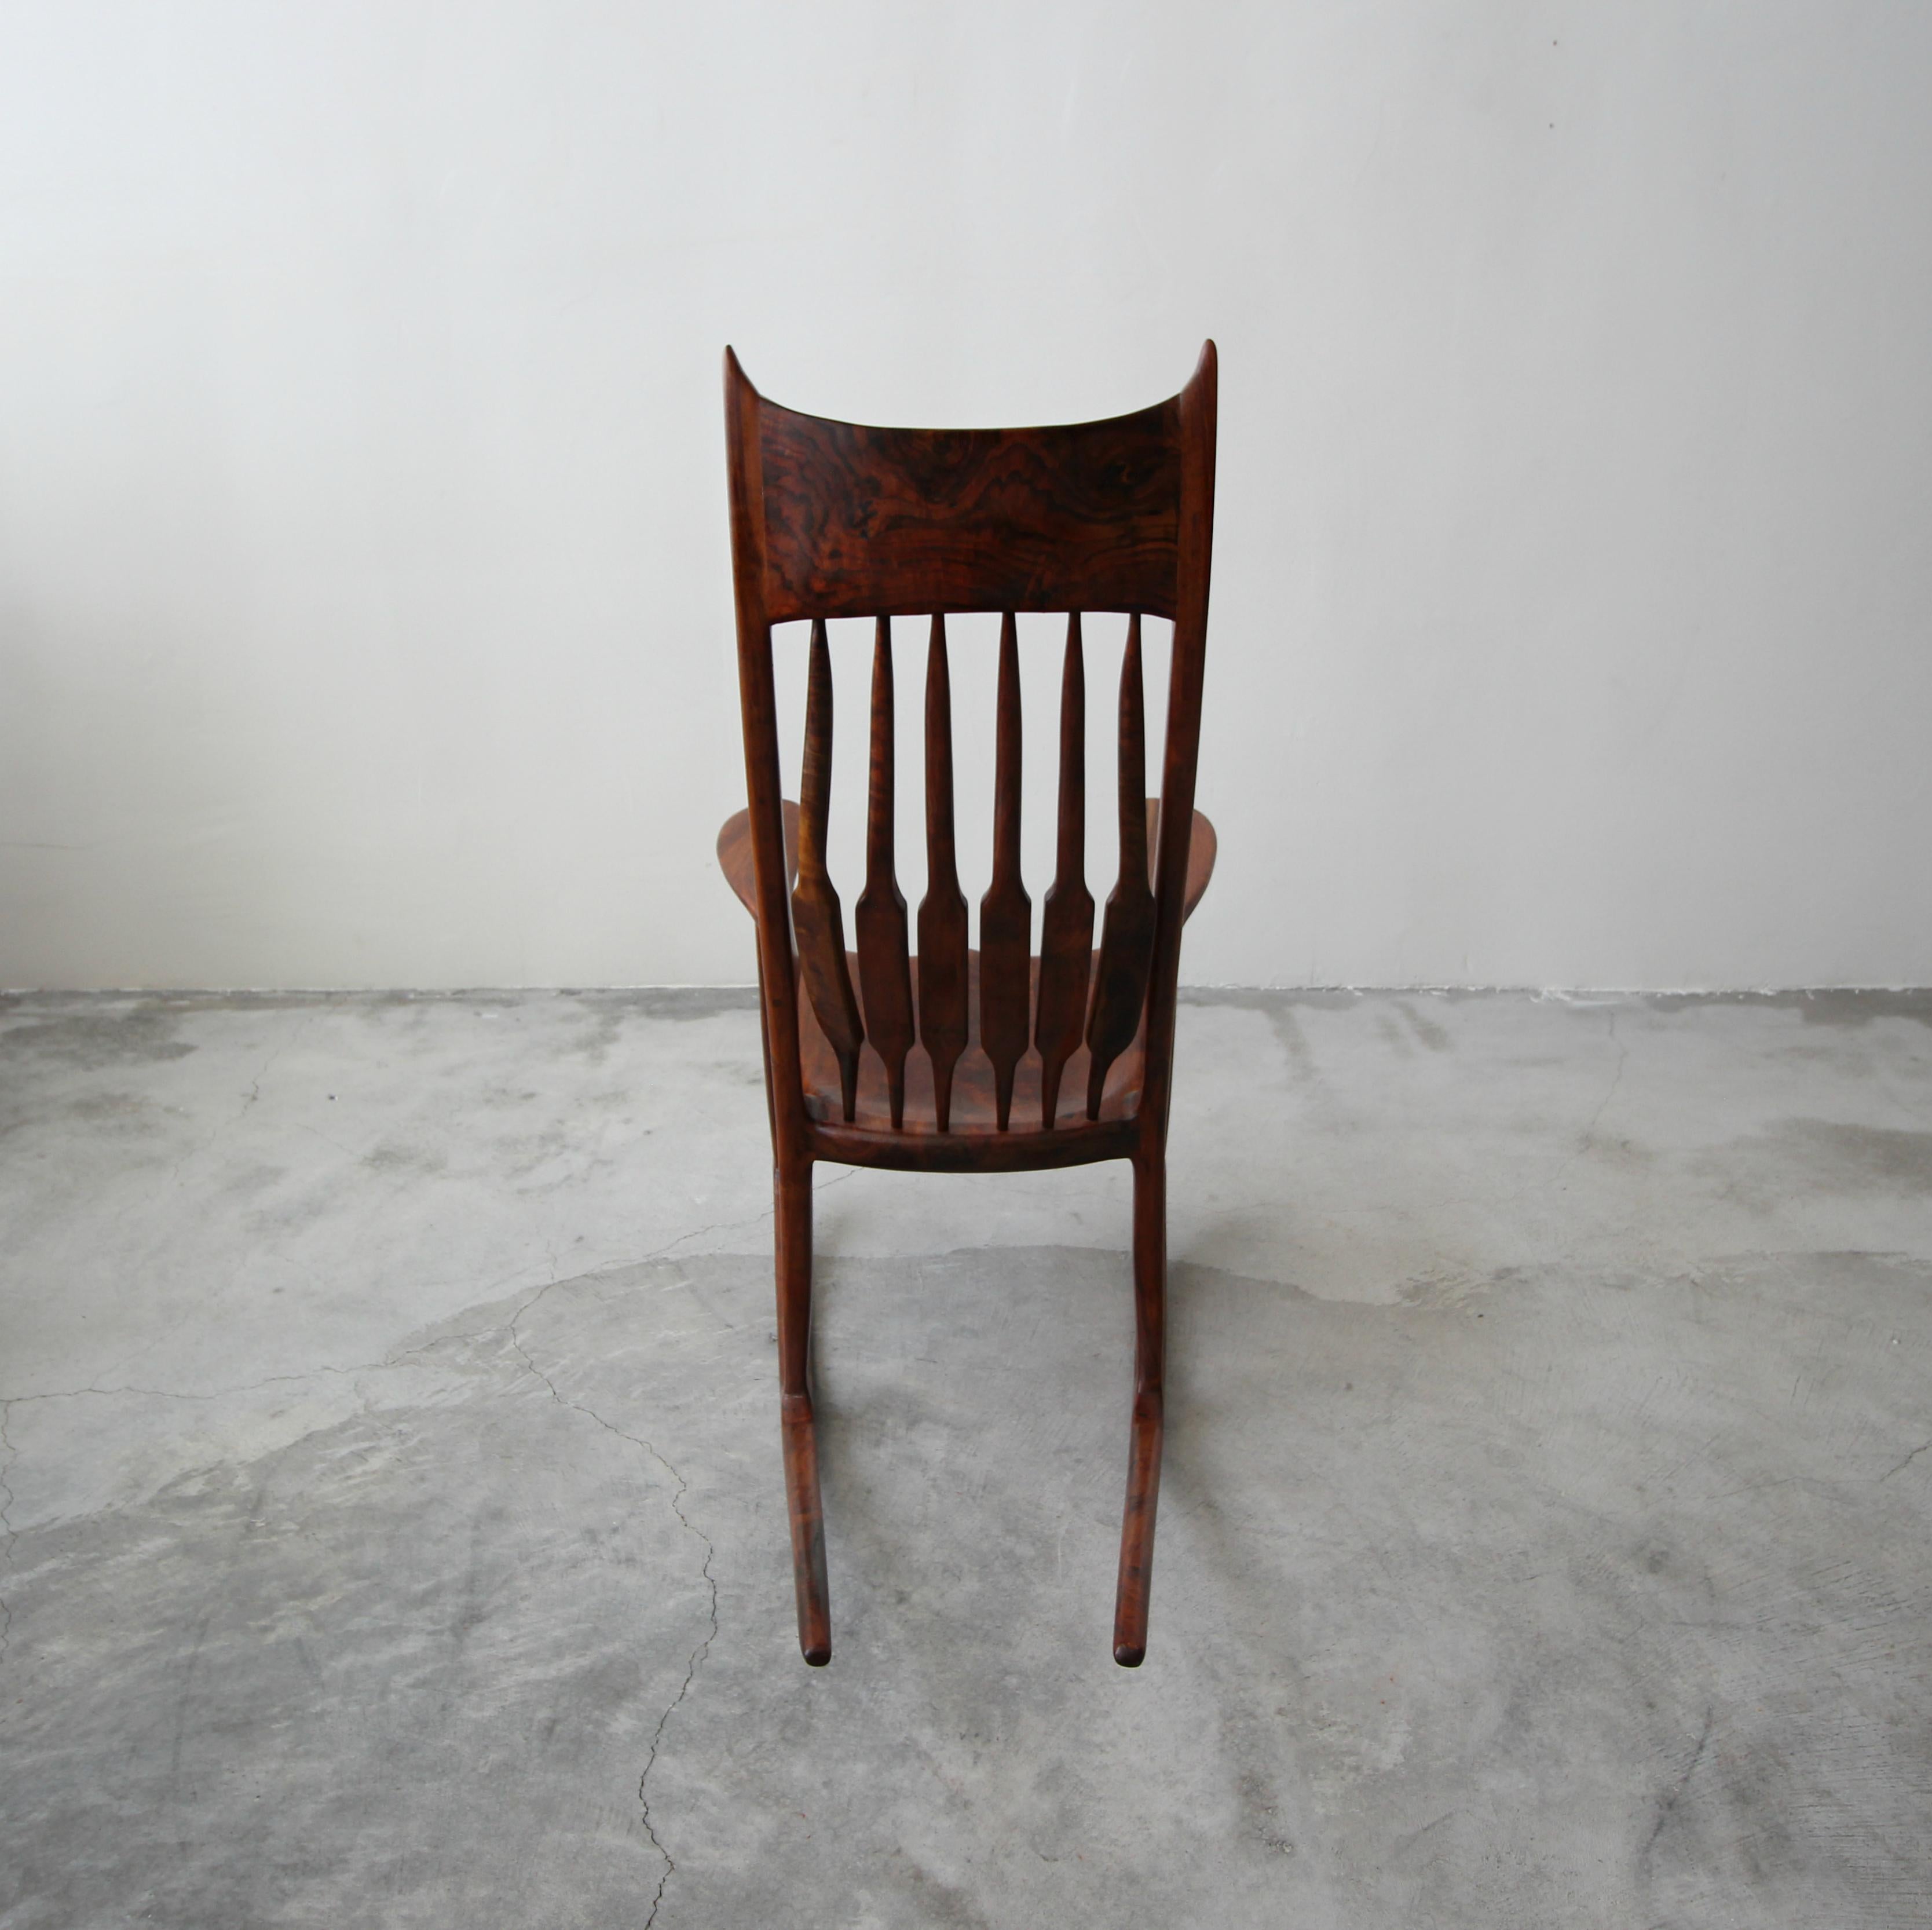 20th Century Sculpted Wood Studio Rocking Chair after Sam Maloof